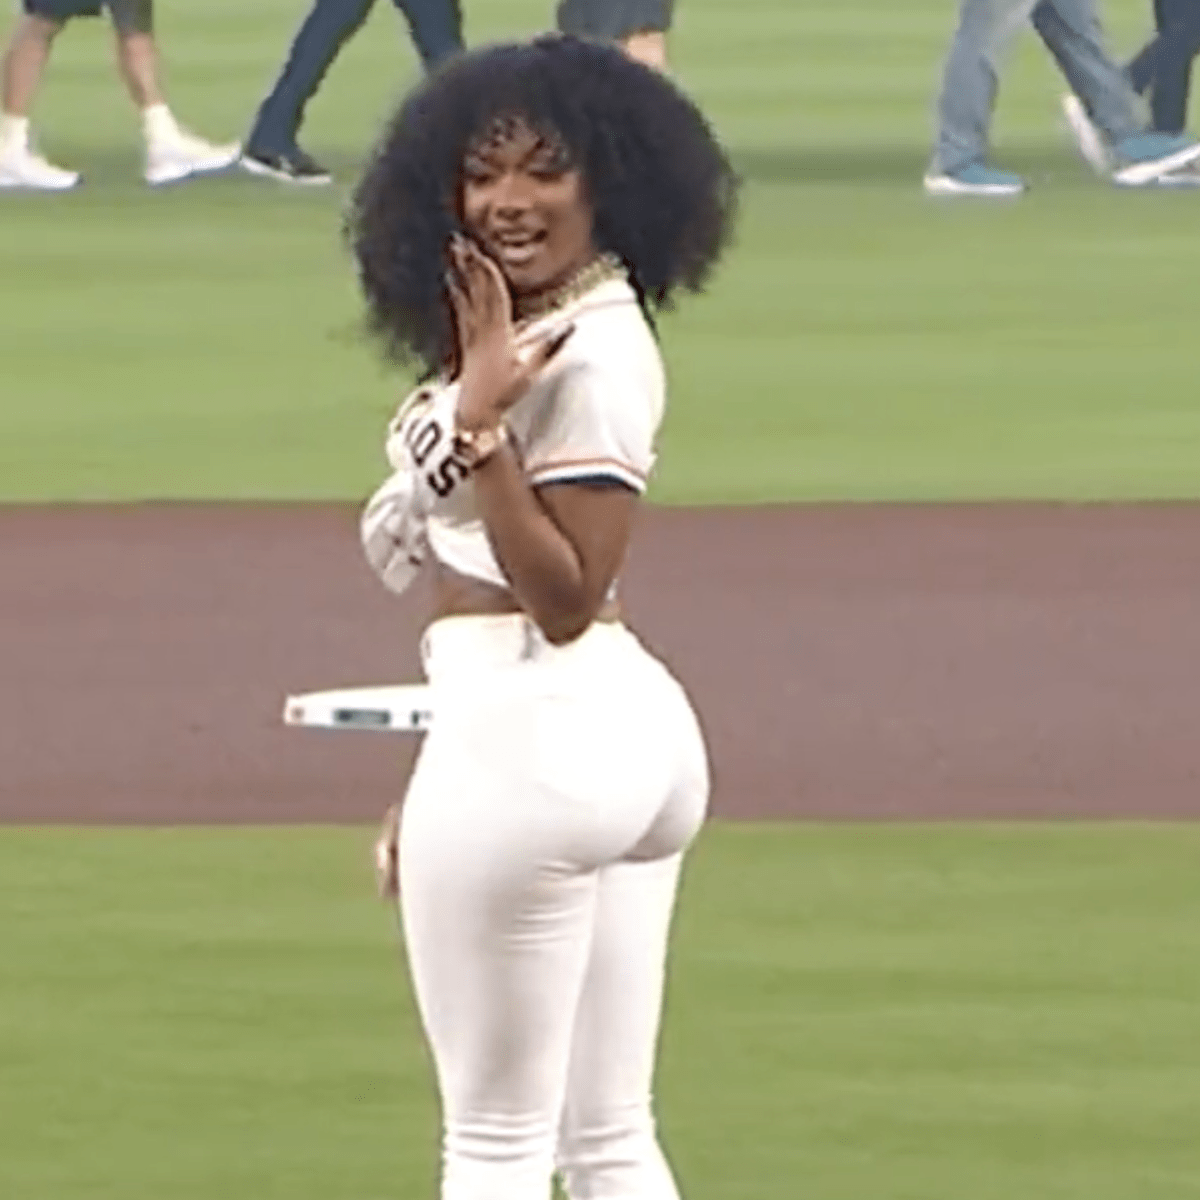 Megan Thee Stallion goes viral after throwing the Houston Astros